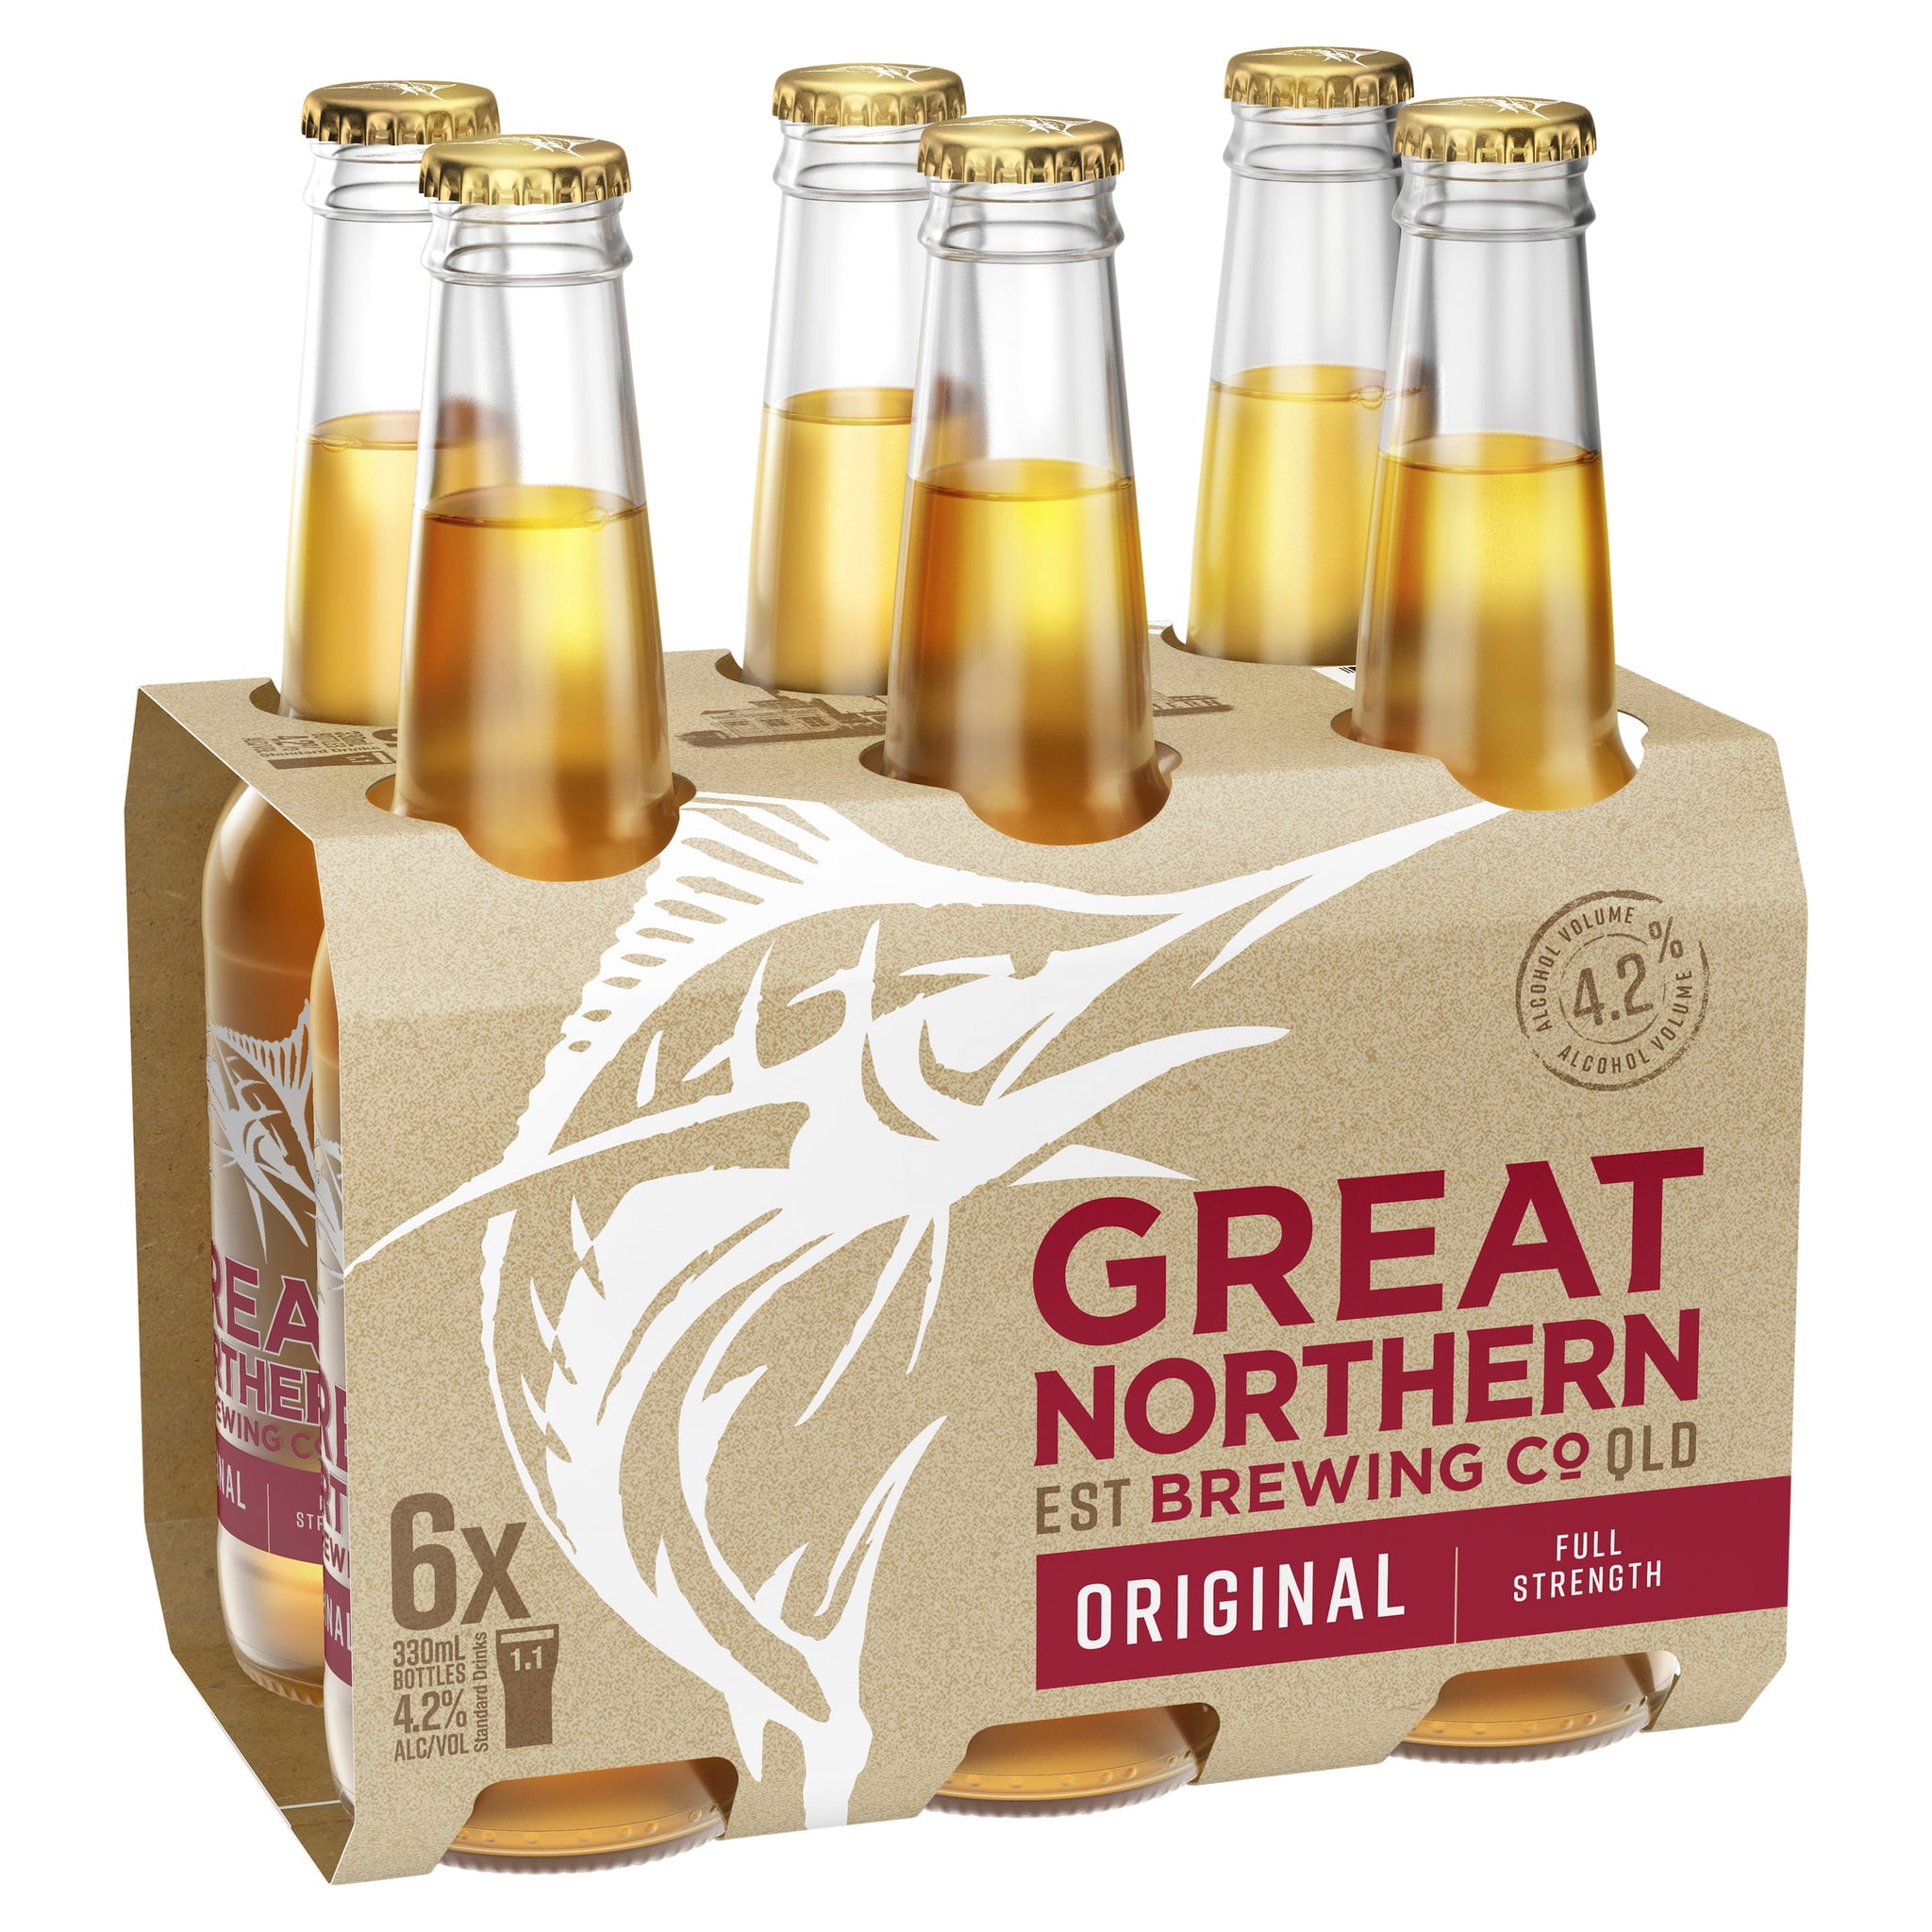 Great Northern Brewing Company Original Lager Bottles 330mL (6 Bottle Pack)